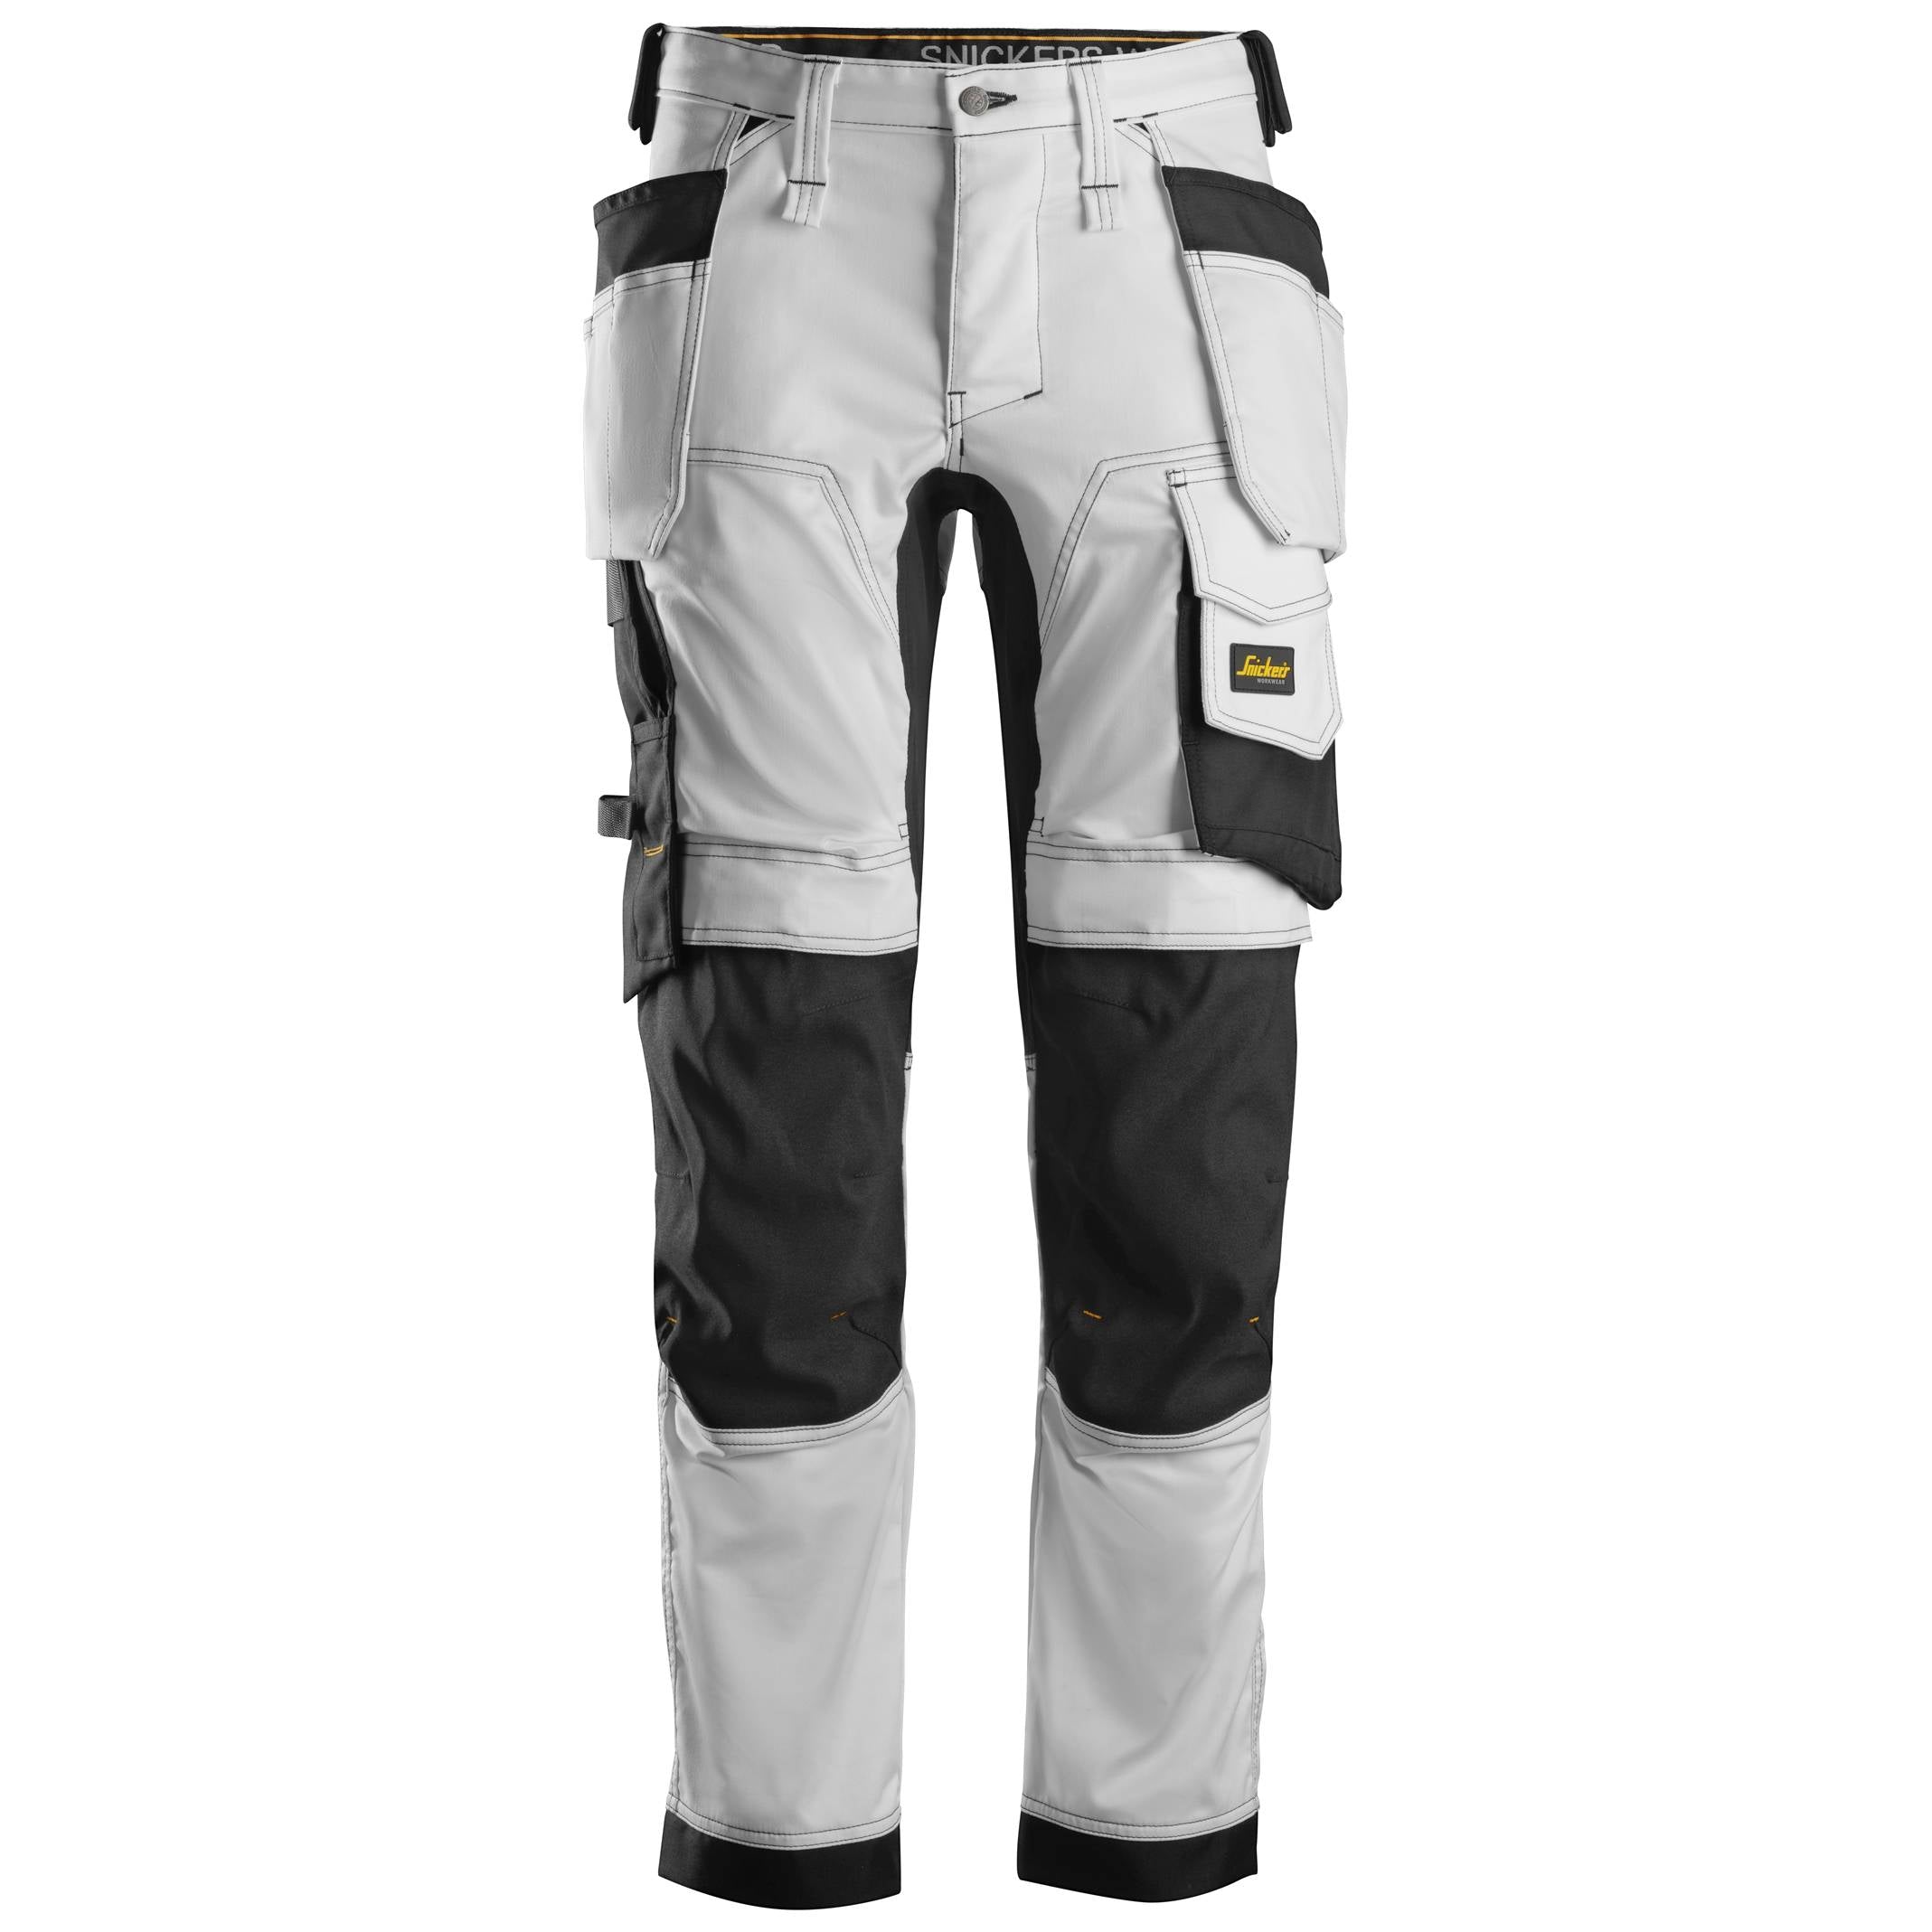 6241 AllroundWork, Stretch Painters Trousers Holster Pockets